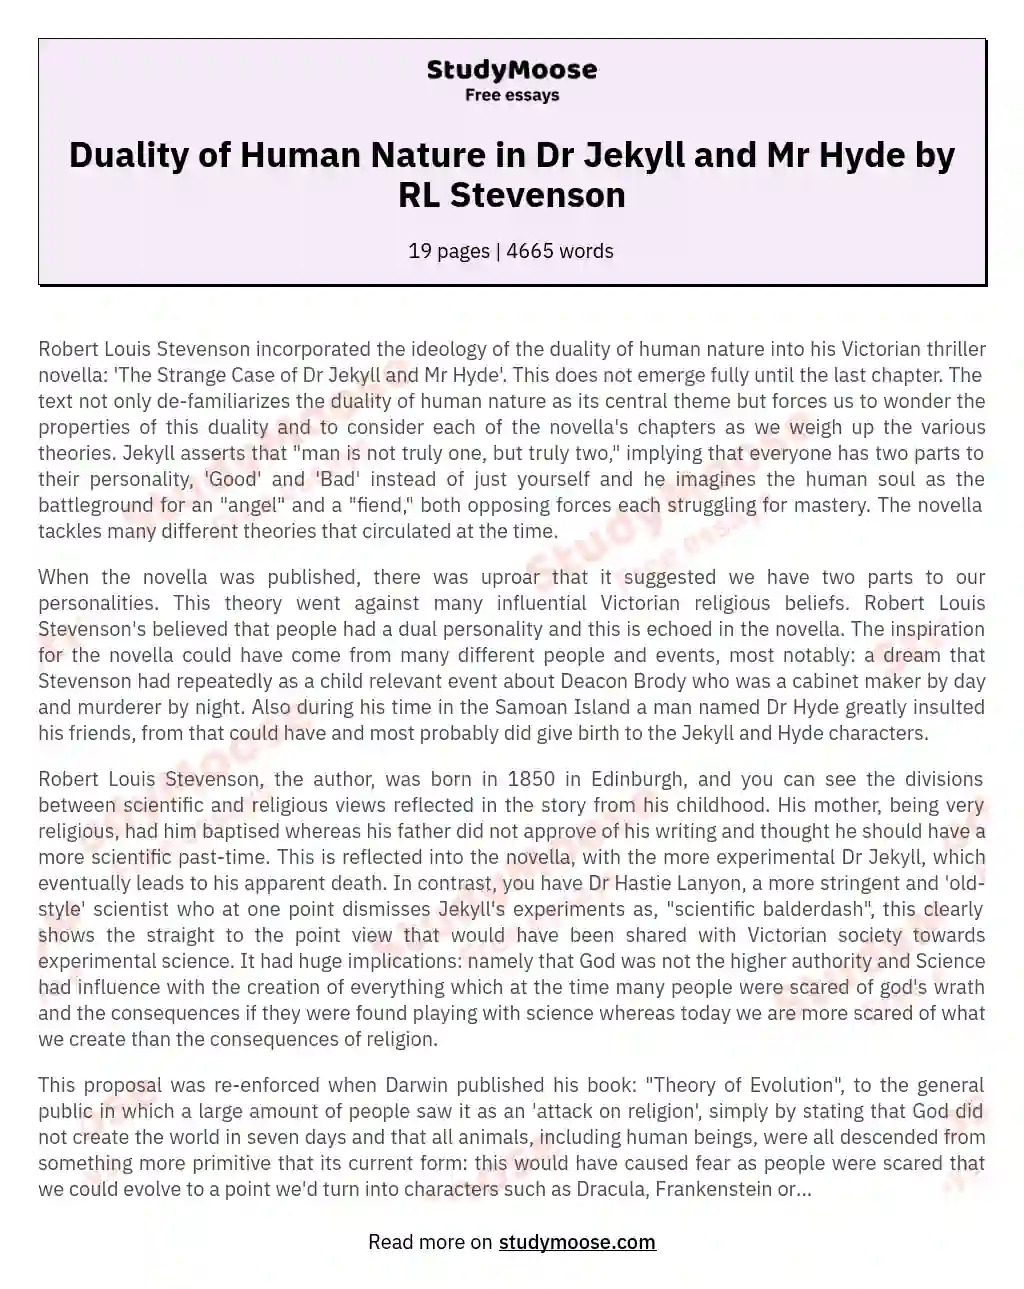 Duality of Human Nature in Dr Jekyll and Mr Hyde by RL Stevenson essay